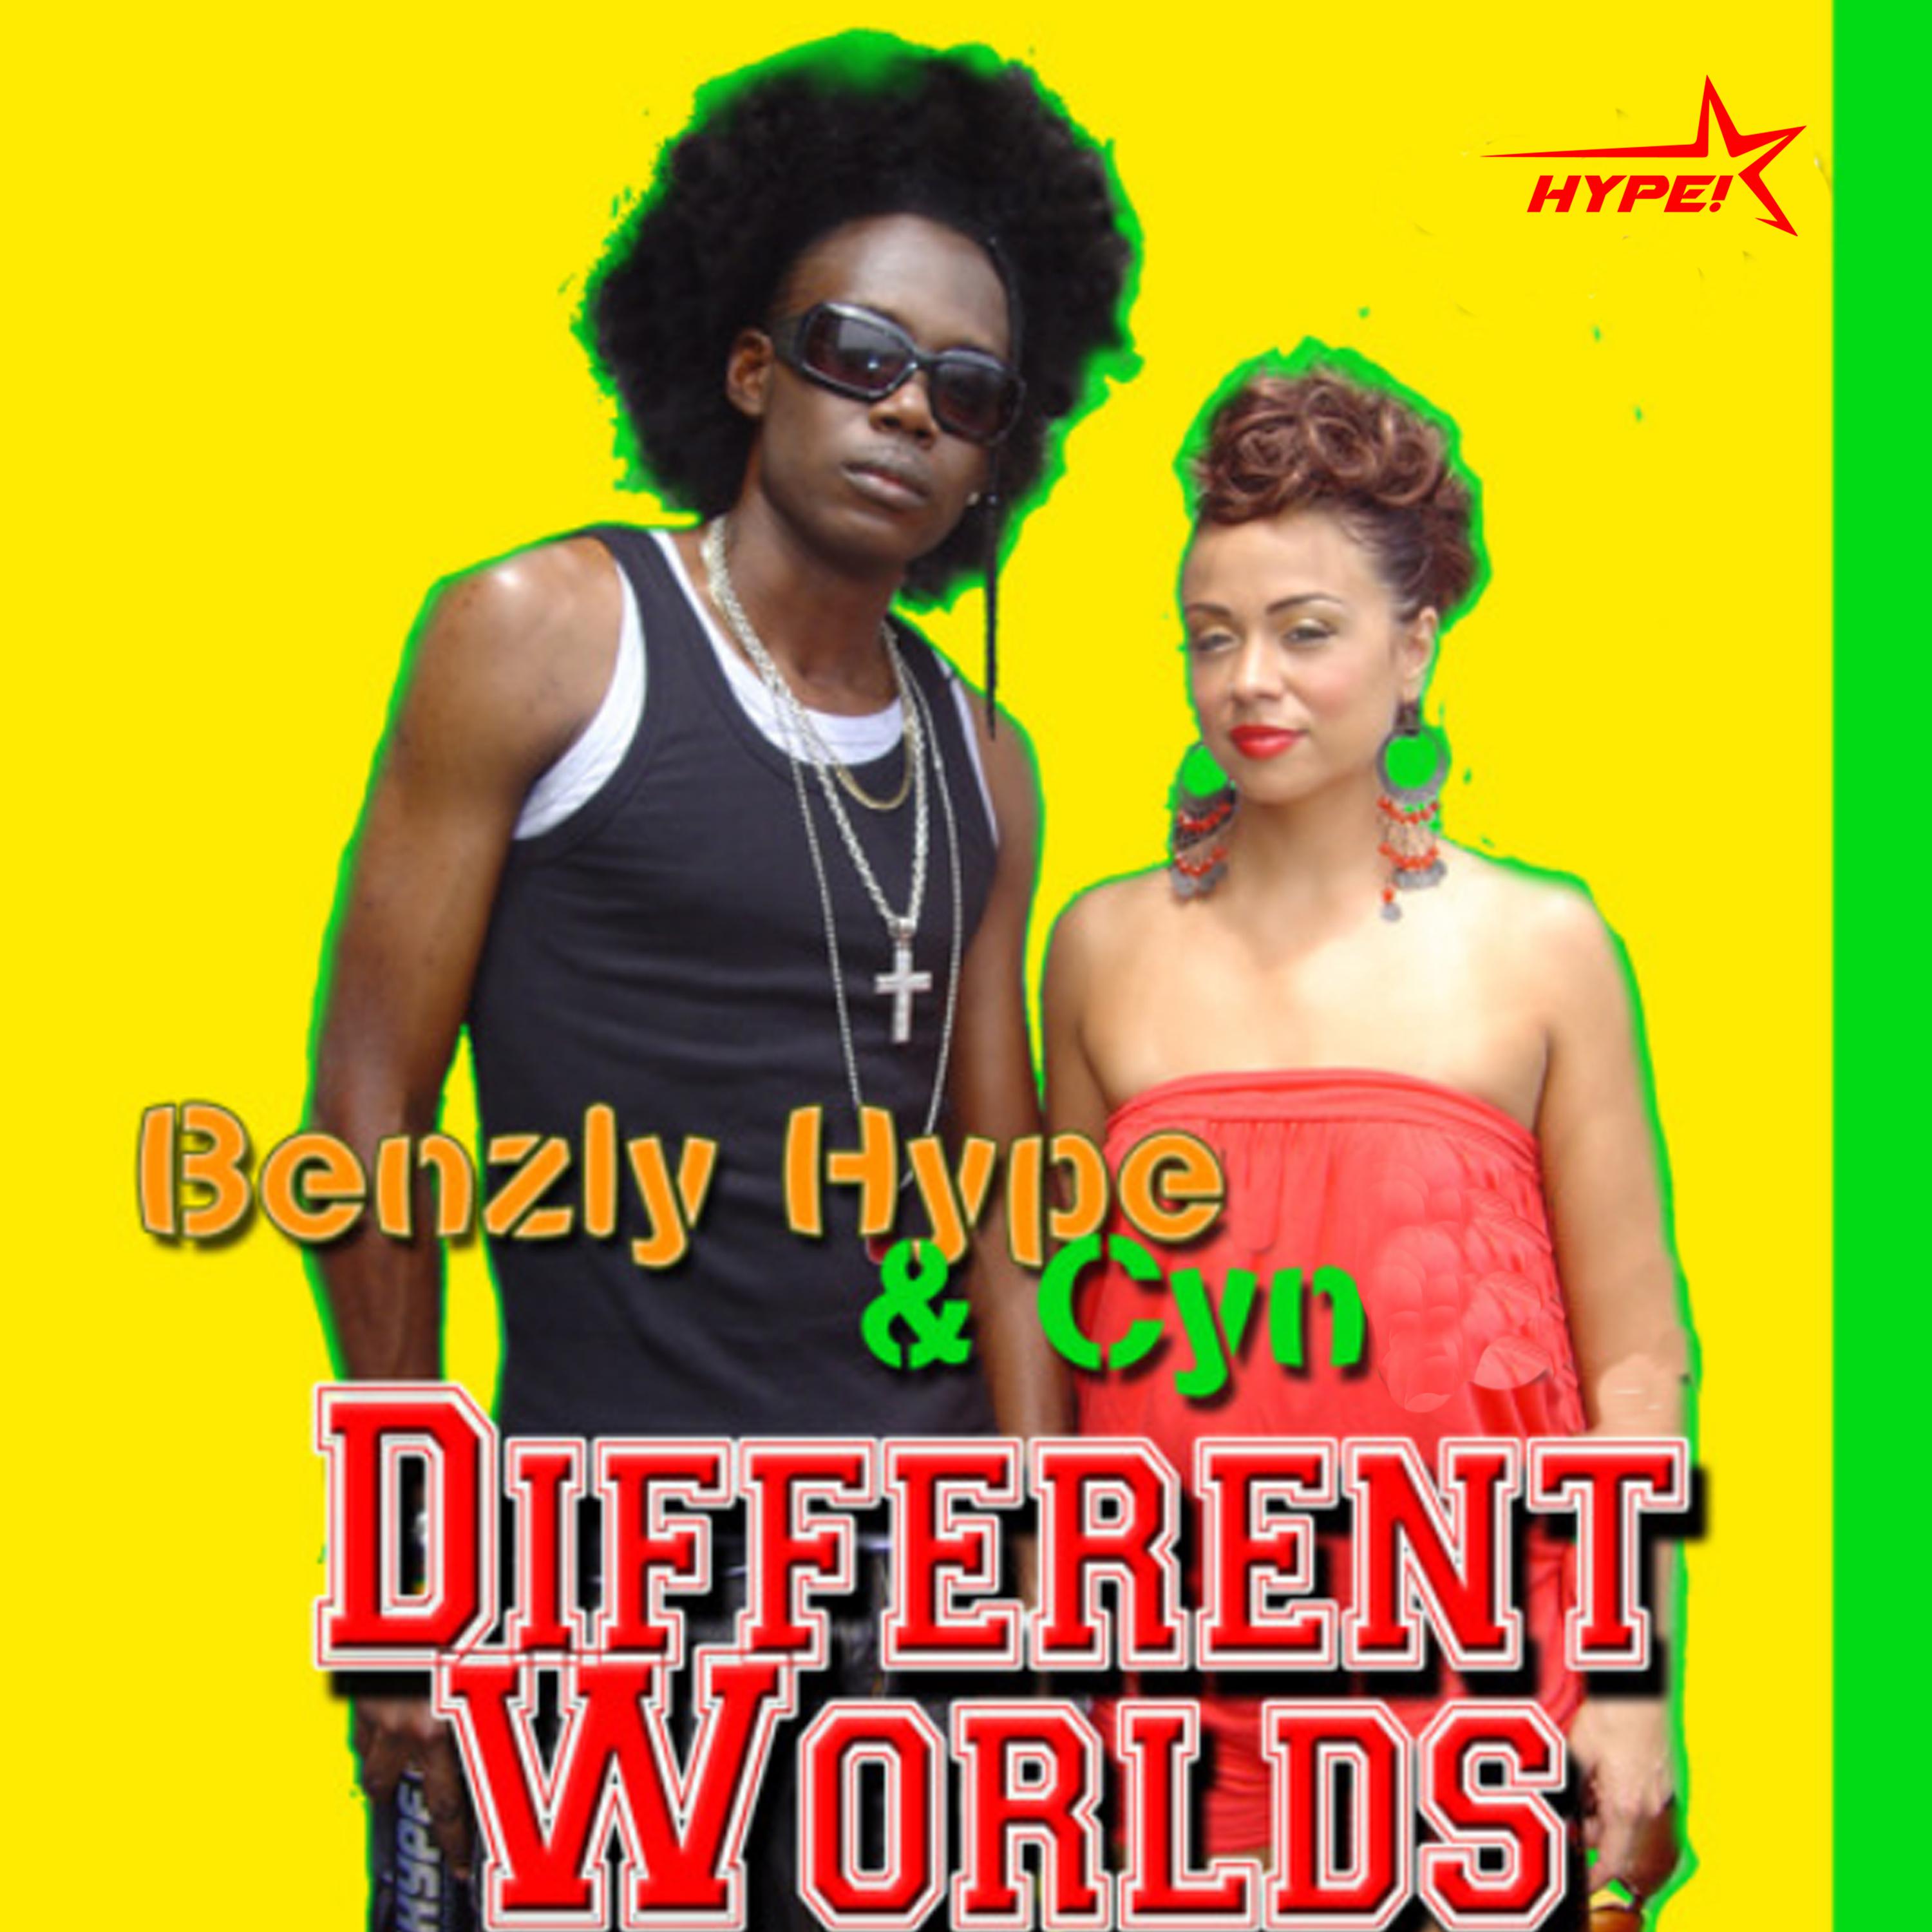 Benzly Hype - Different Worlds